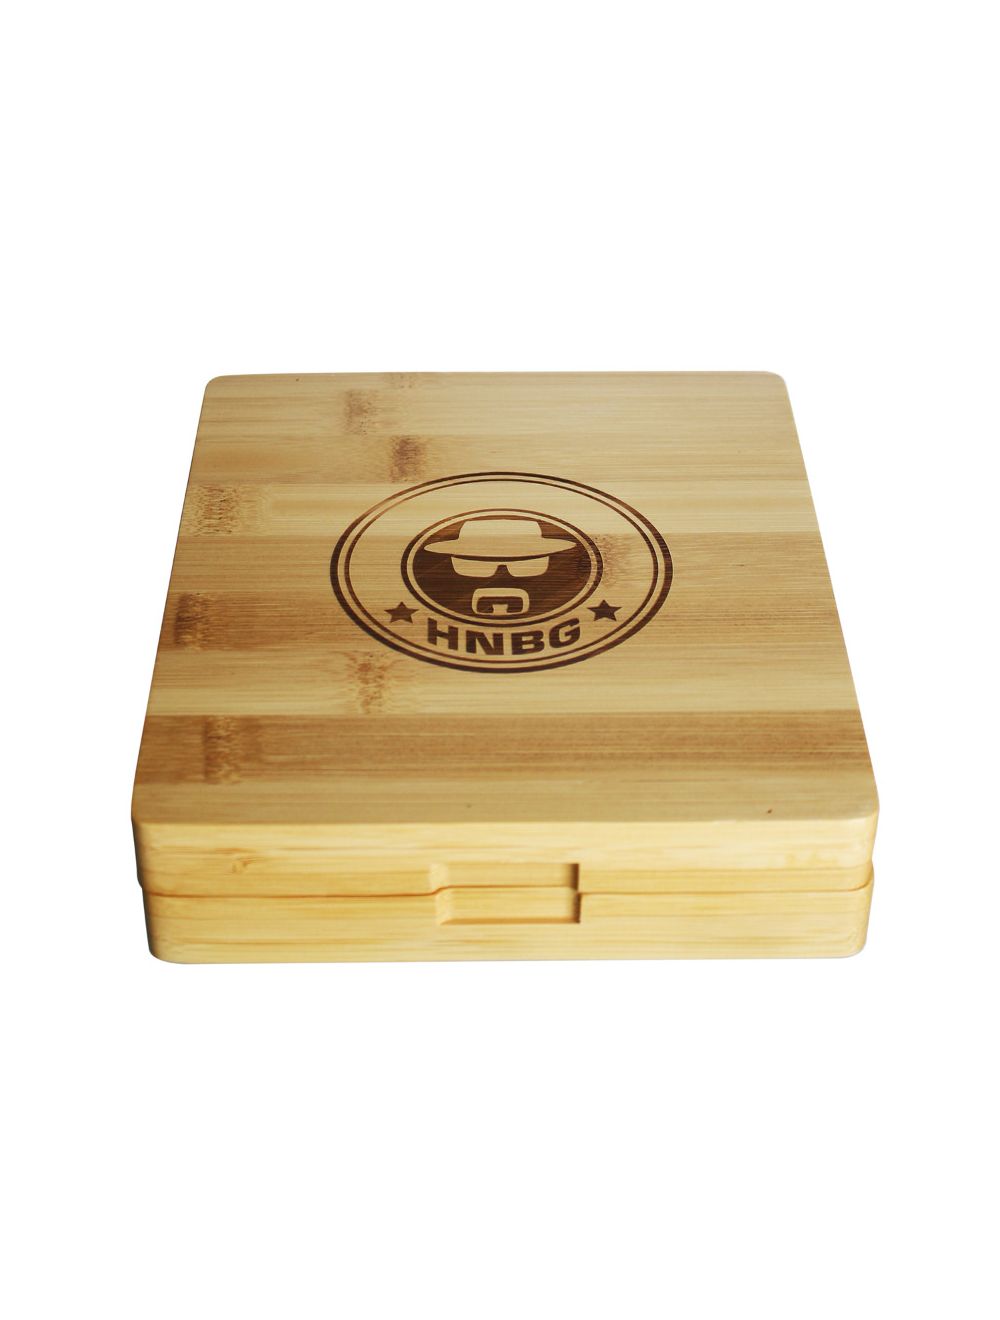 HNBG Dabbing Set 6-piece with Bamboo Box and Rolling Tray